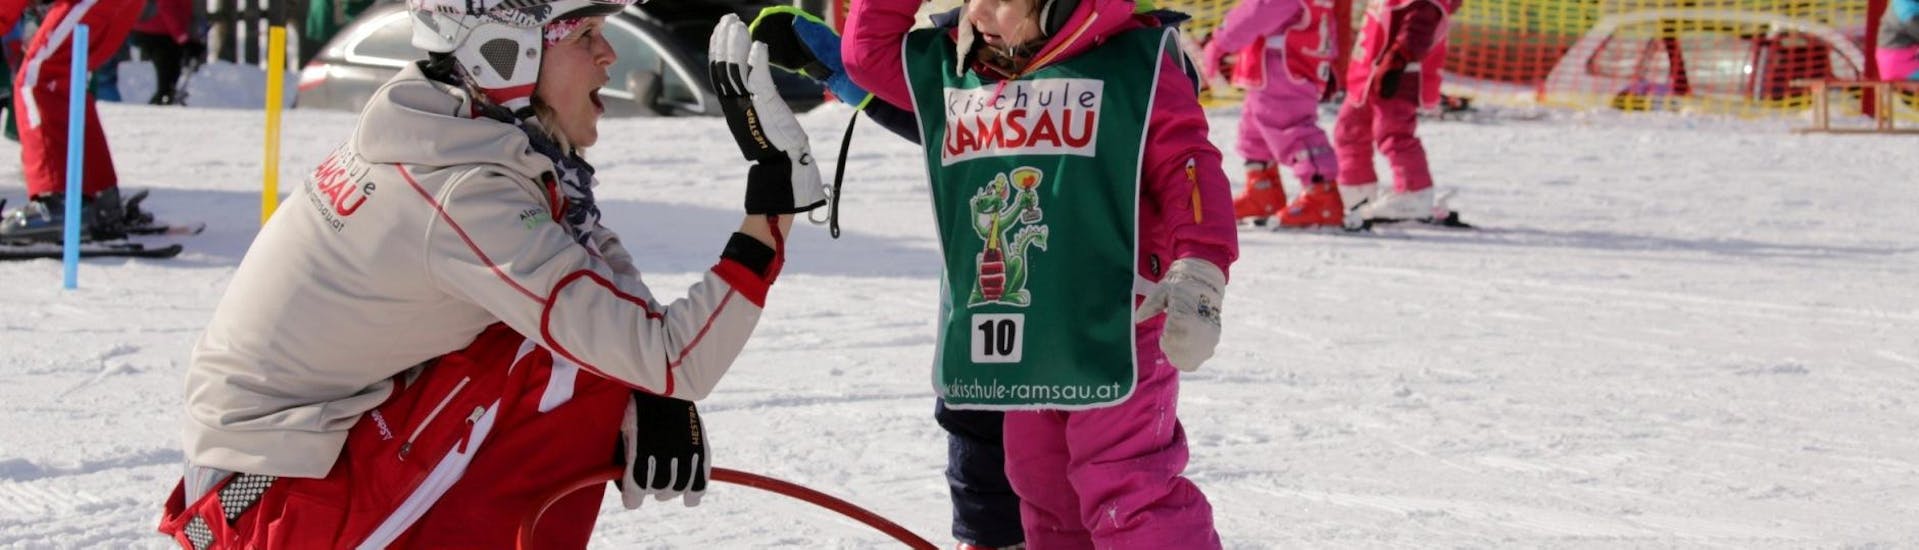 An instructor giving a kid a high-five during kids ski lessons "Bambini" for all levels with ski school Ramsau.